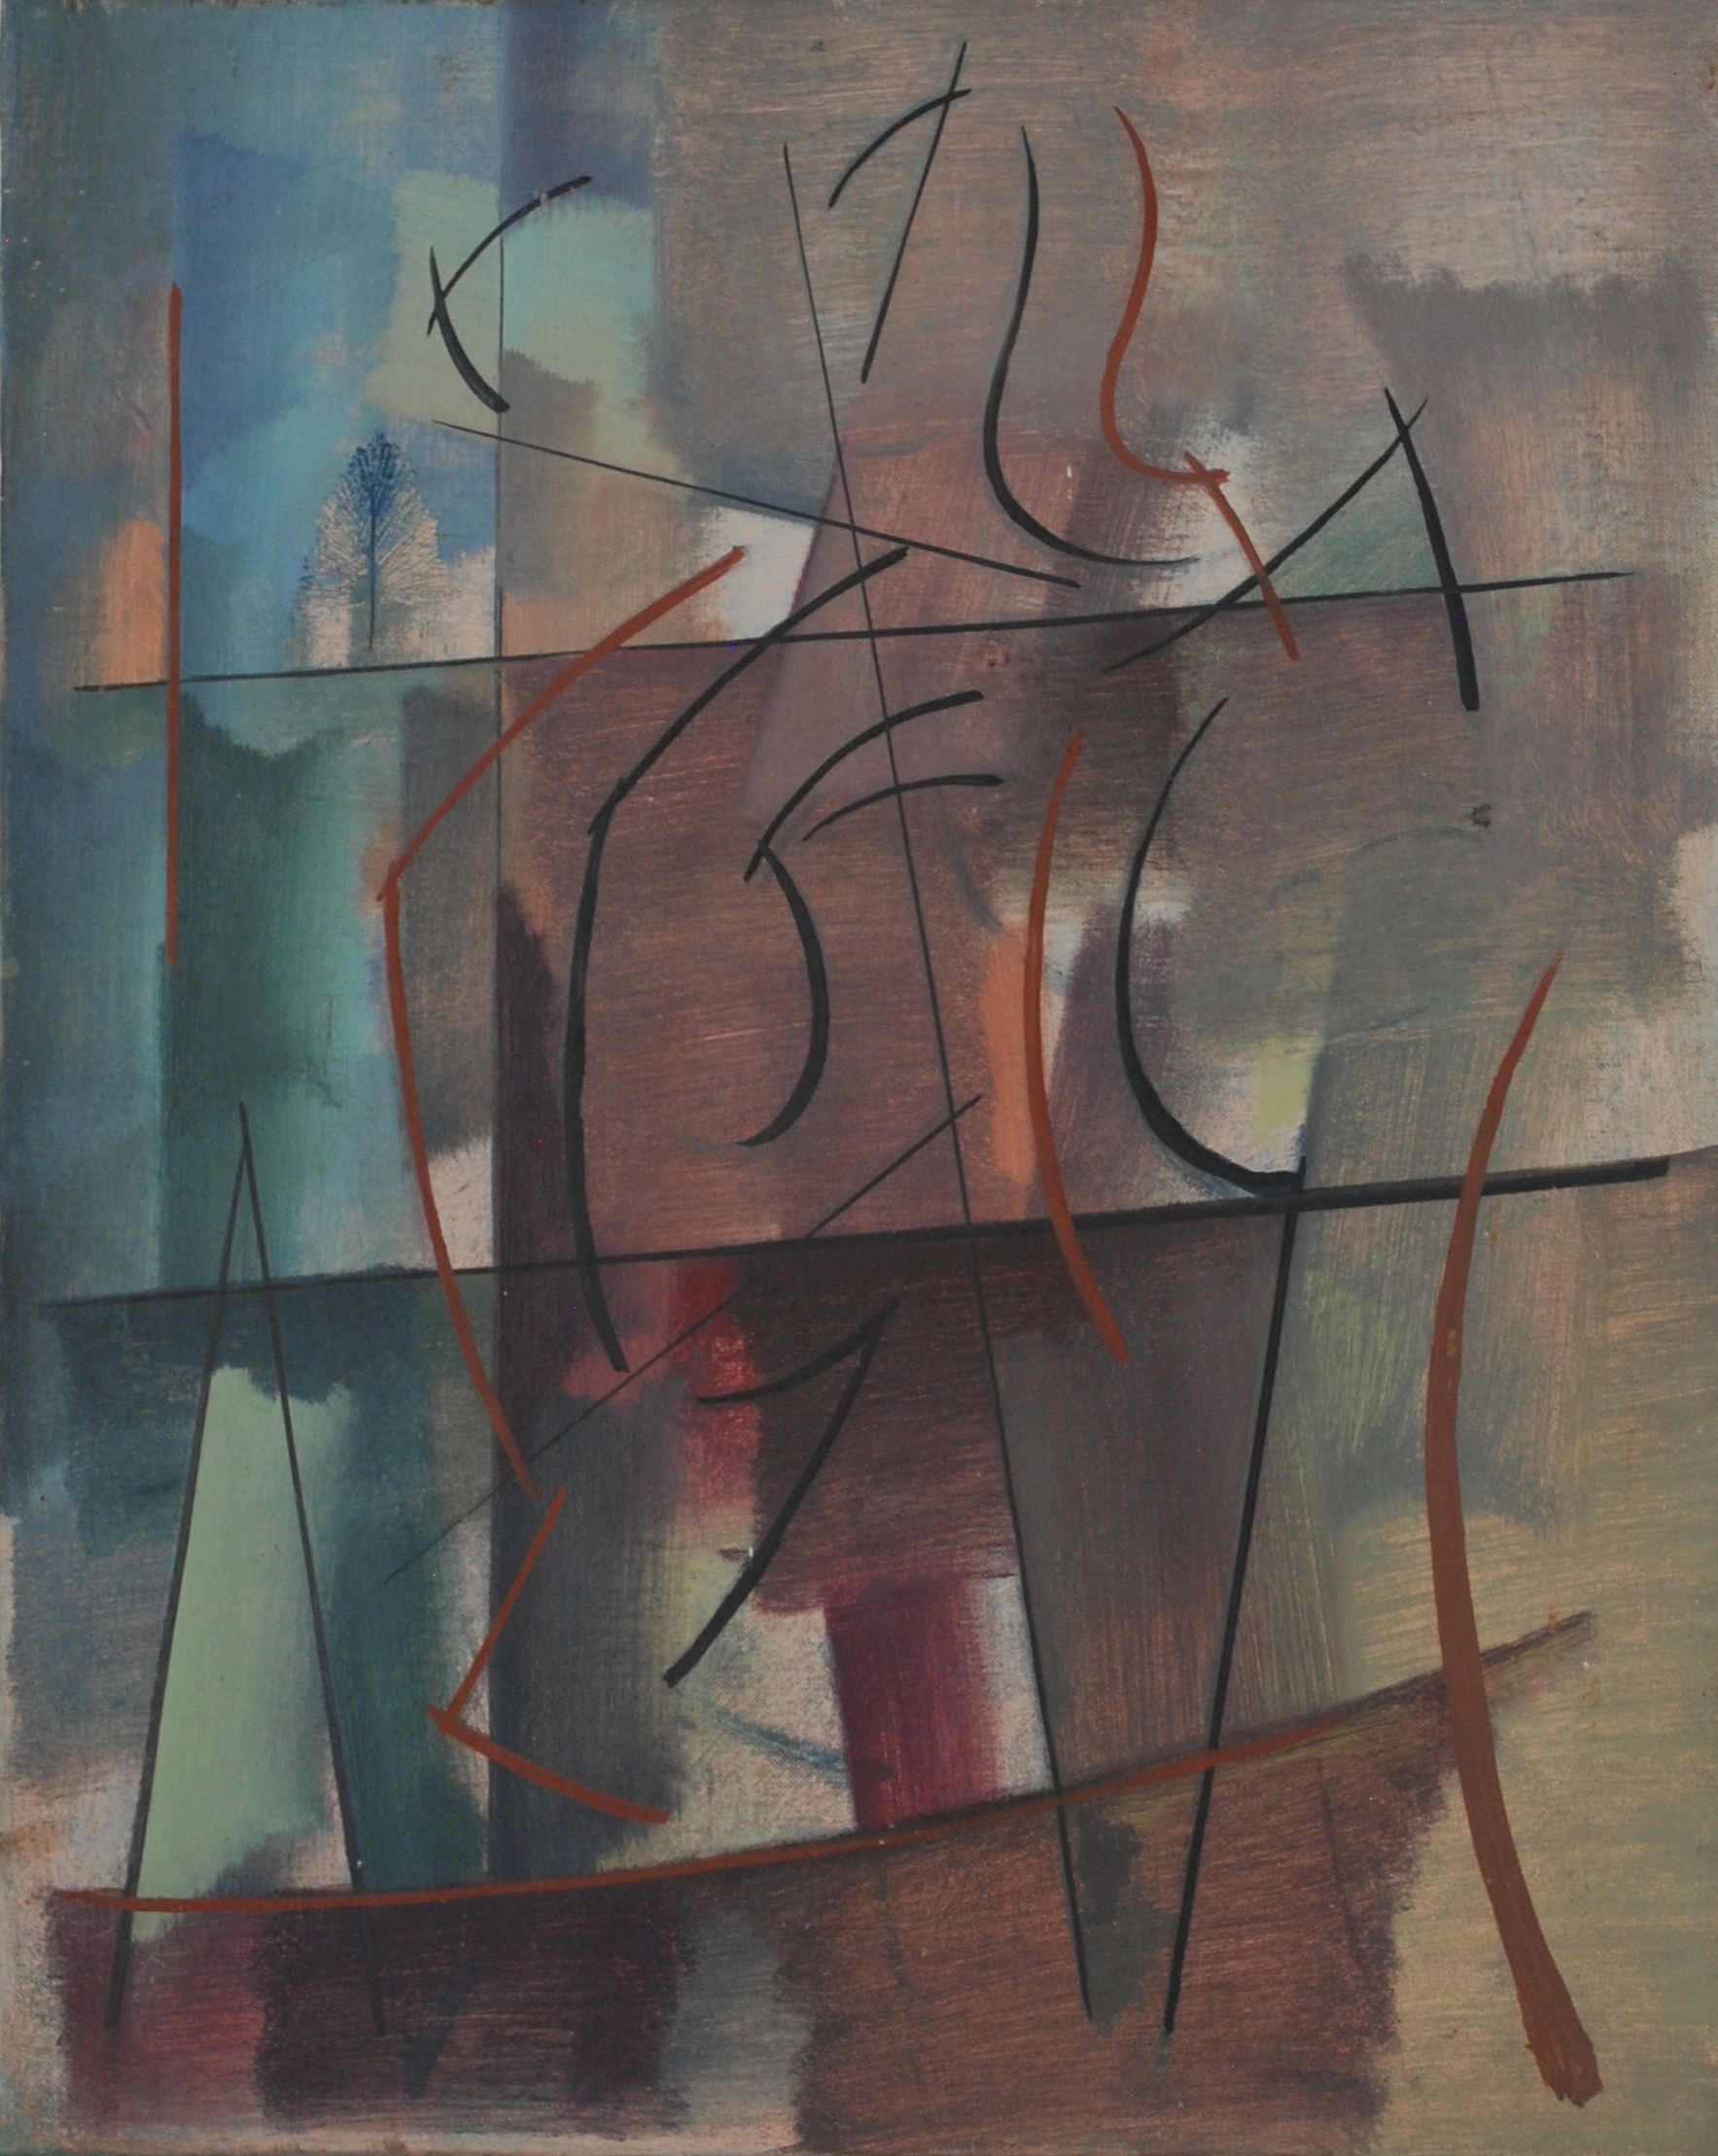  Figurative Abstract, c1958 Oil on Canvas, 41 x 51cm 